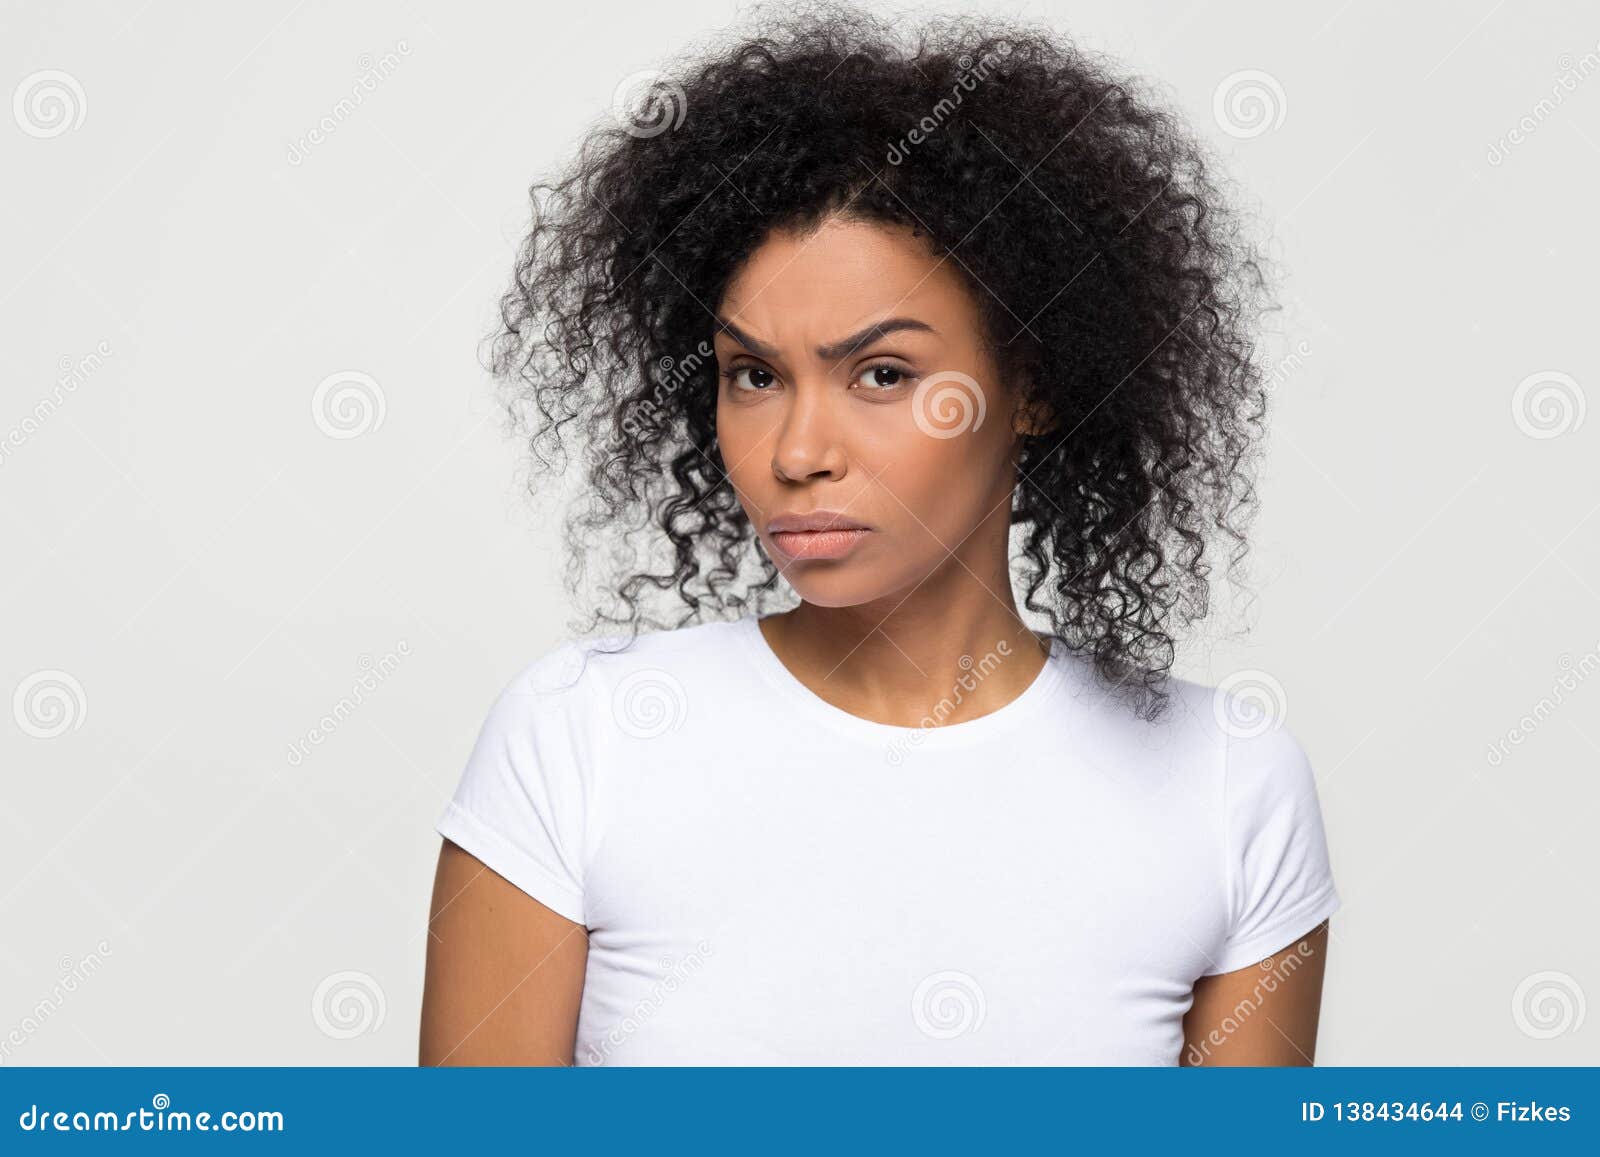 suspicious african woman with distrustful face looking at camera